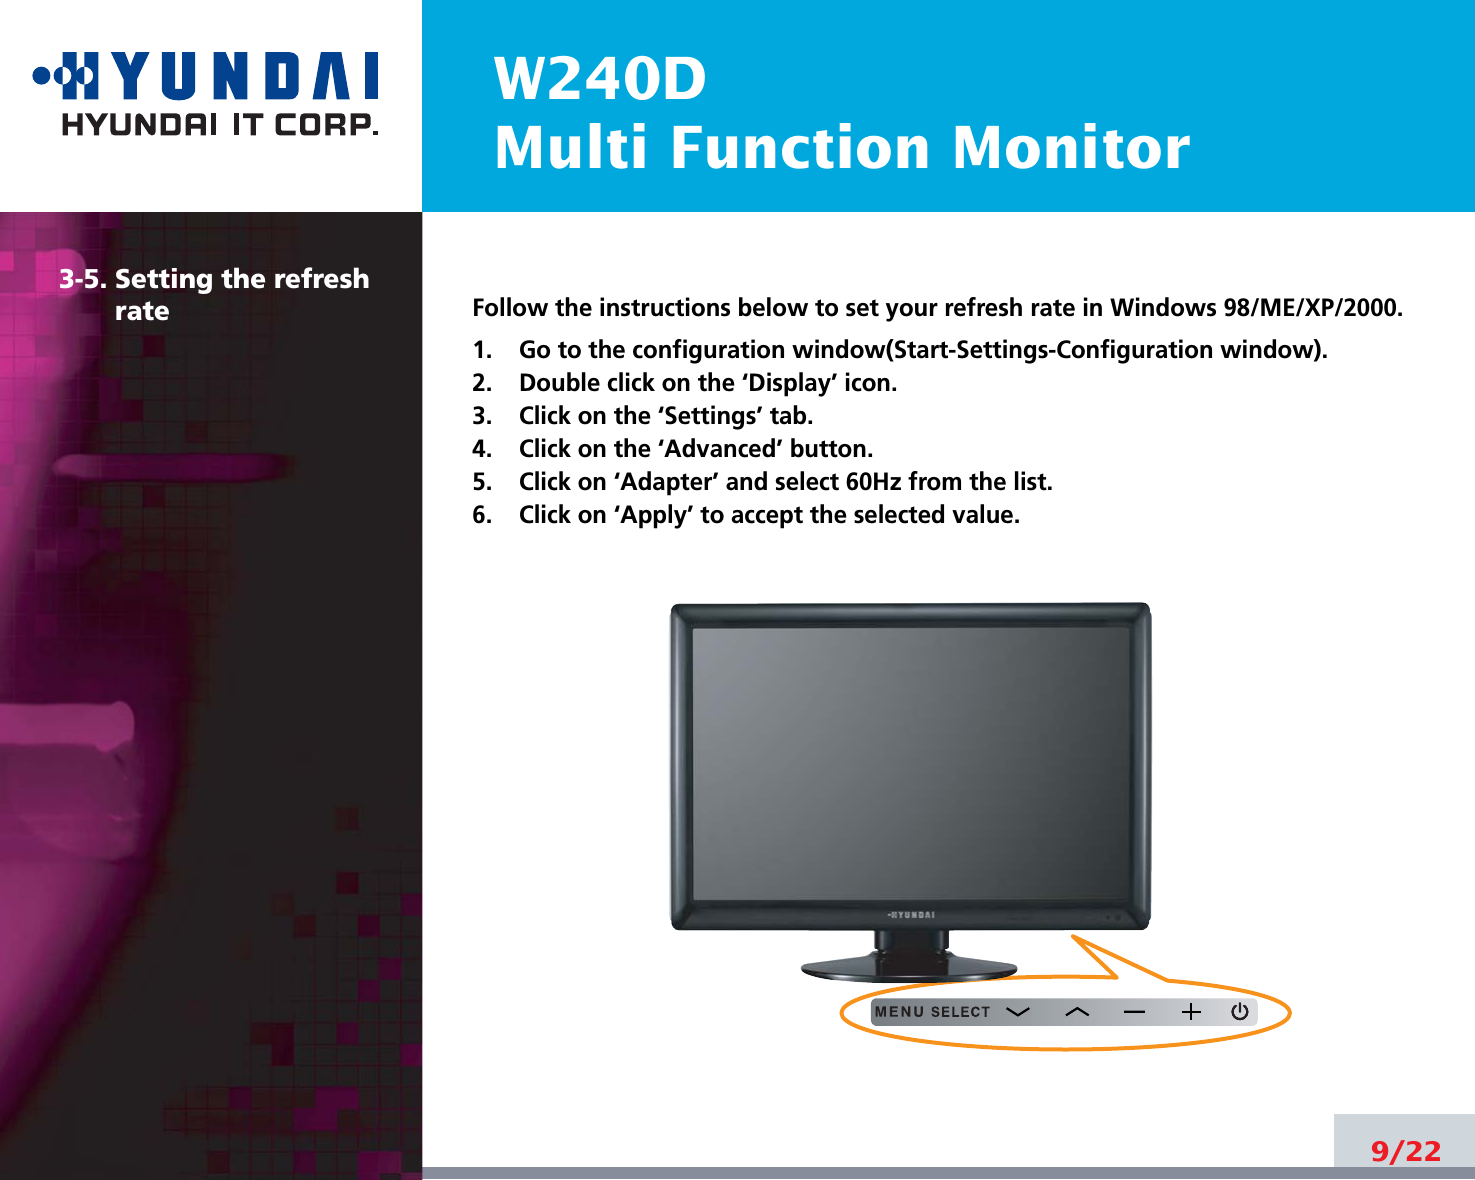 W240DMulti Function Monitor9/223-5. Setting the refreshrate Follow the instructions below to set your refresh rate in Windows 98/ME/XP/2000.1.    Go to the configuration window(Start-Settings-Configuration window).2.    Double click on the ‘Display’ icon.3.    Click on the ‘Settings’ tab.4.    Click on the ‘Advanced’ button.5.    Click on ‘Adapter’ and select 60Hz from the list.6.    Click on ‘Apply’ to accept the selected value.